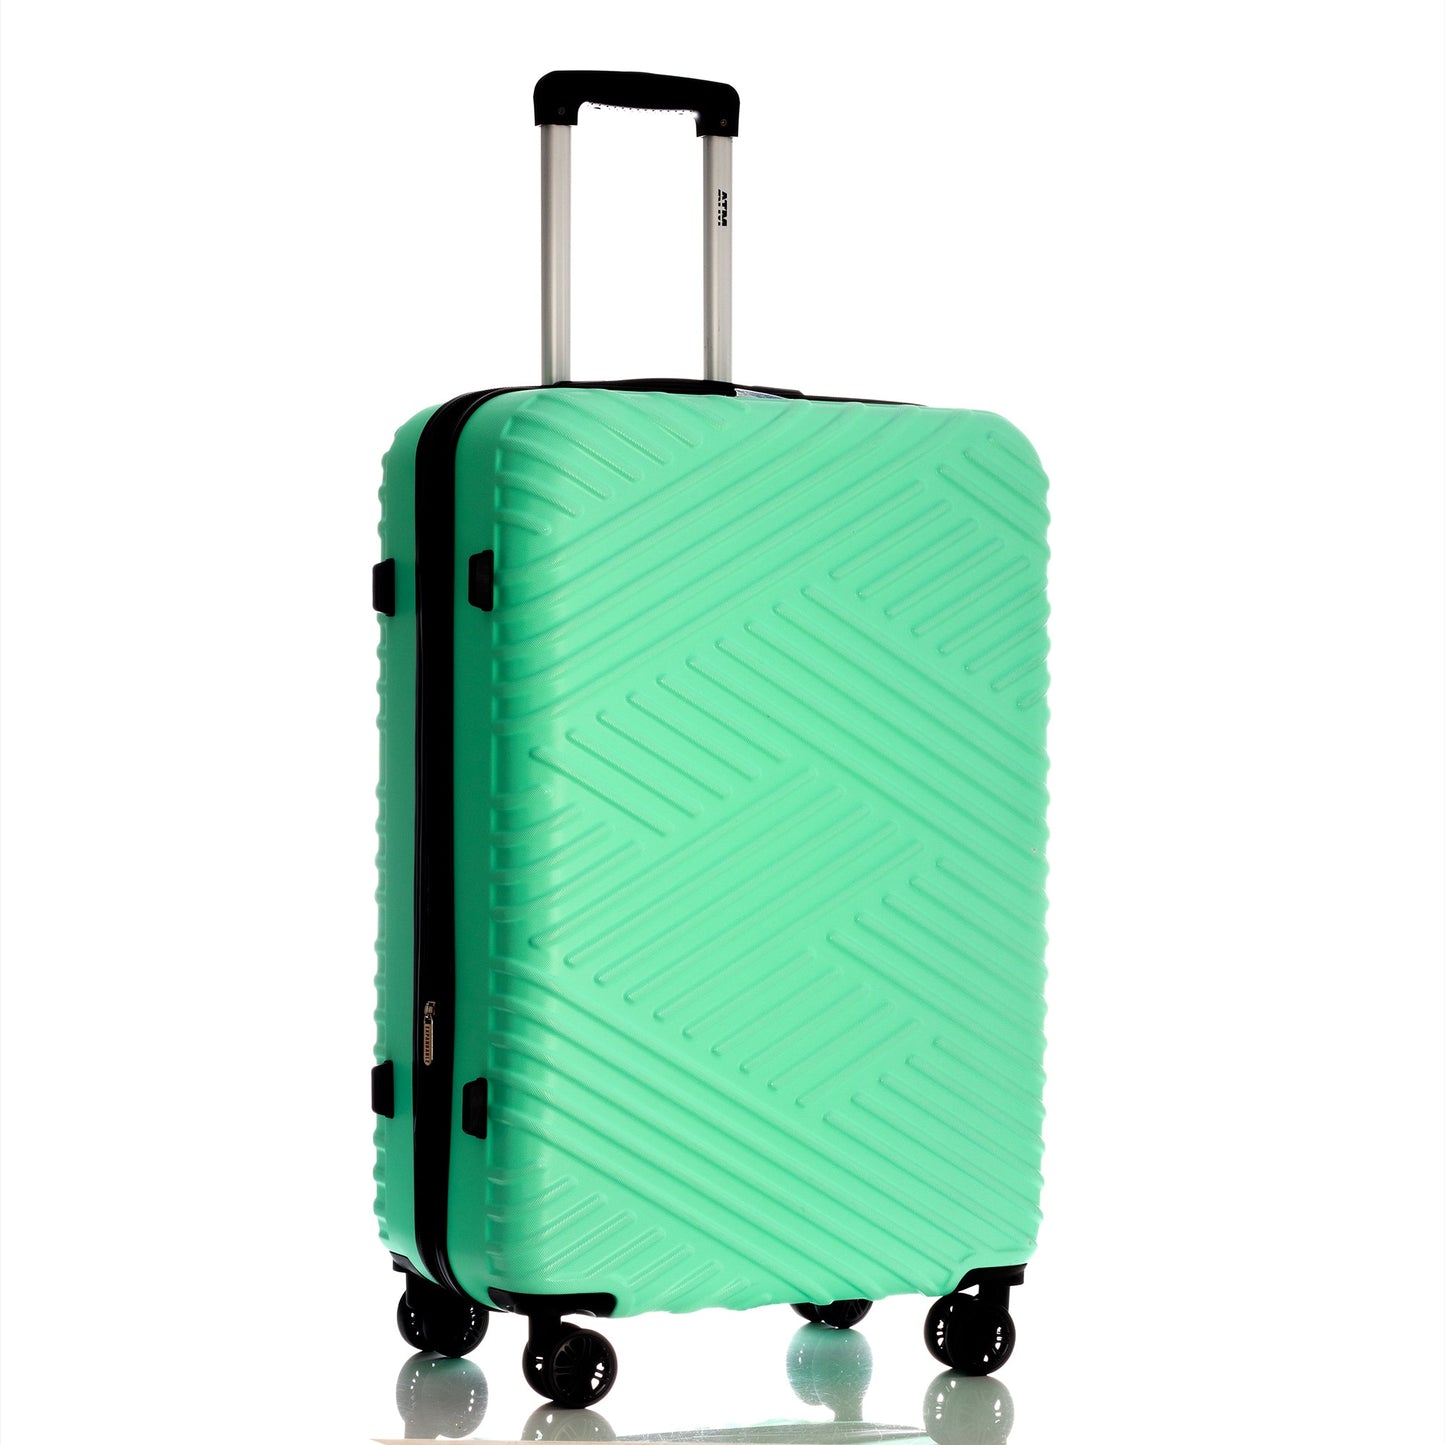 Neon Collection Turquoise Luggage (21/25/29") Suitcase Lock Spinner Hardshell